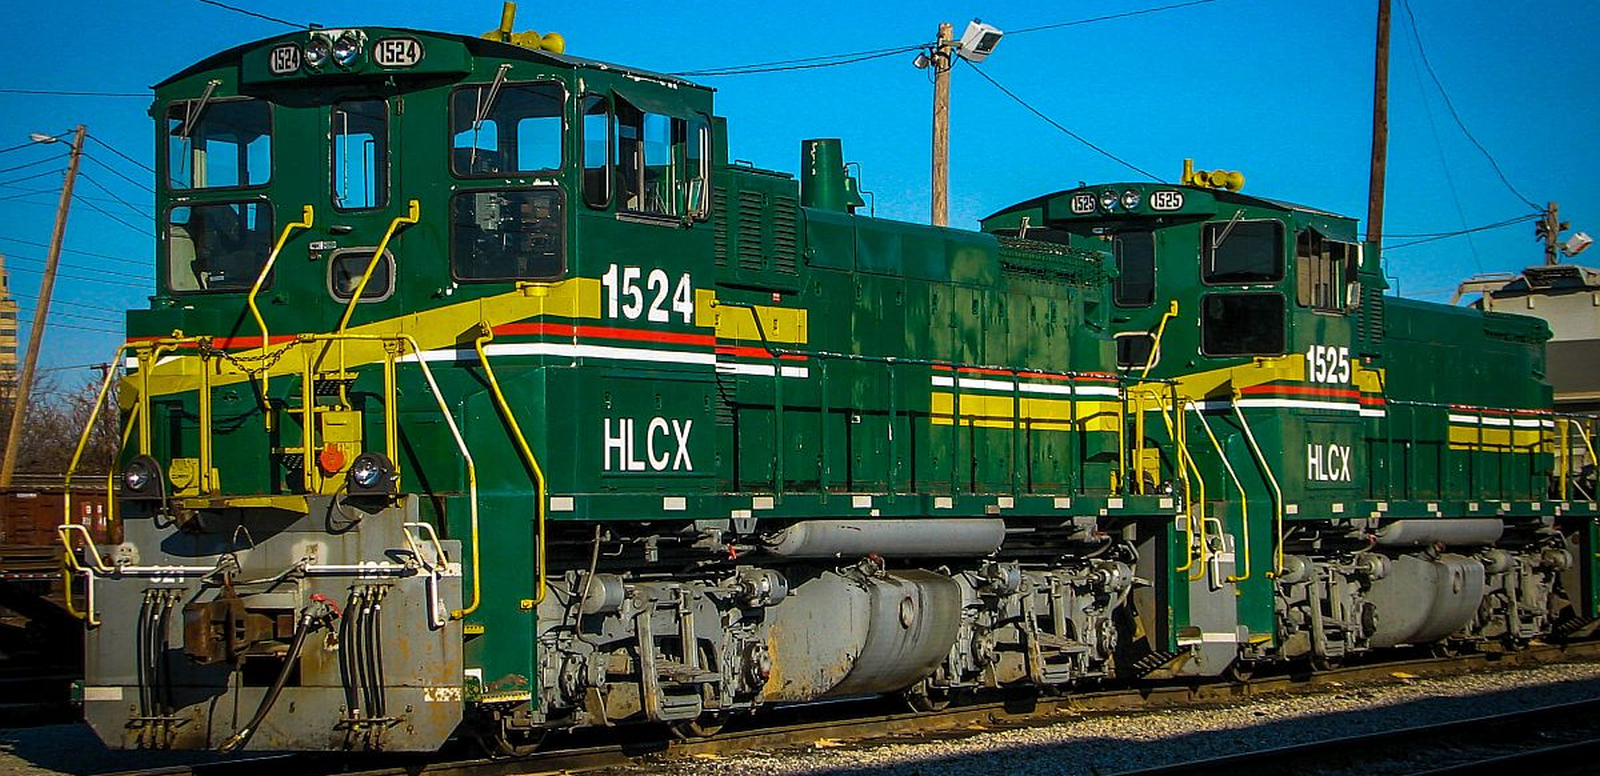 SW1504 by HLCX (Helm Financial Corporation) in January 2008 in Dallas, Texas